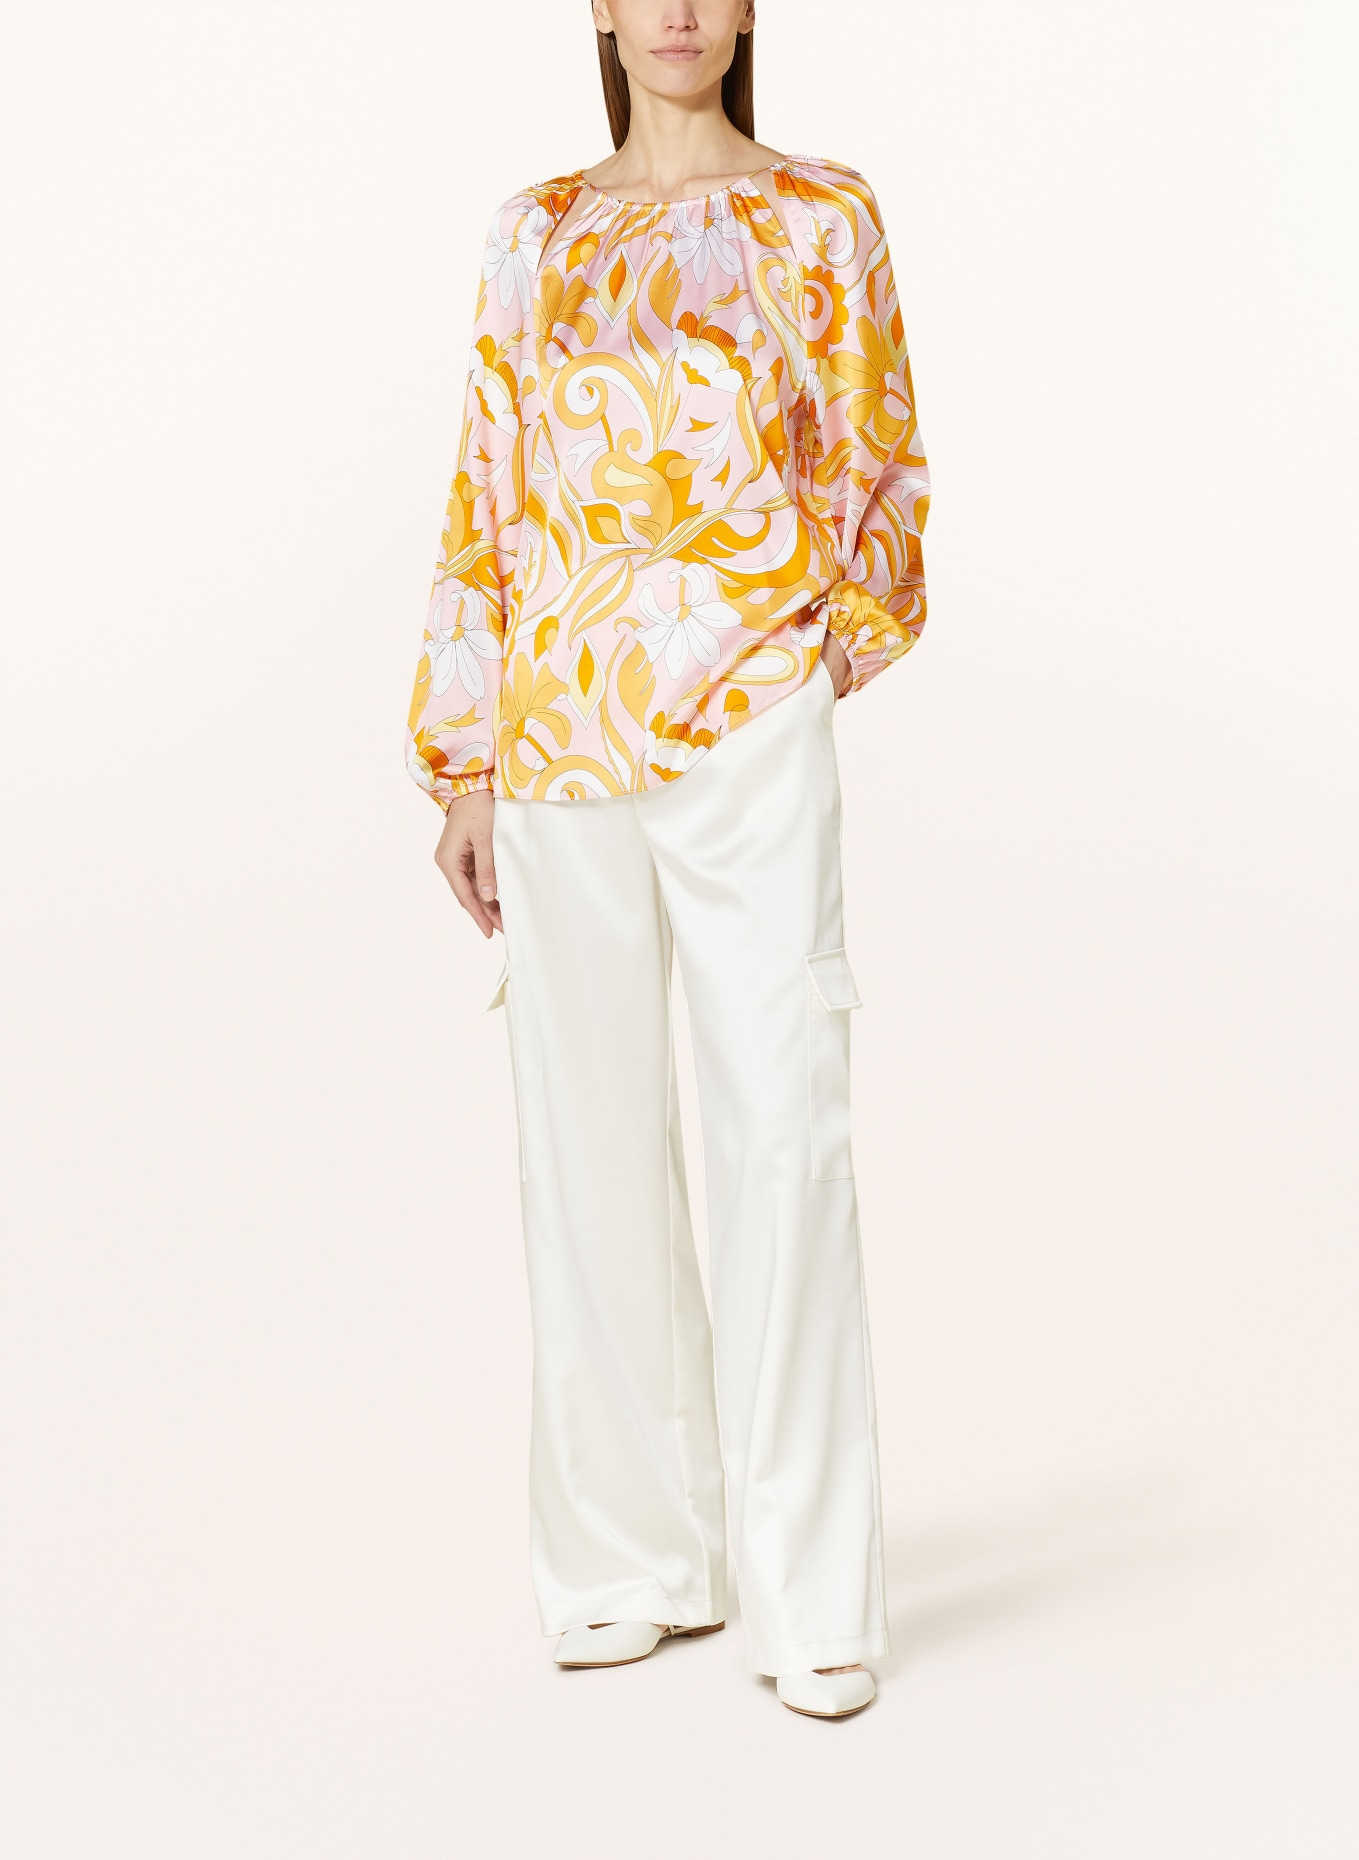 HERZEN'S ANGELEGENHEIT Shirt blouse in silk with cut-outs, Color: ROSE/ ORANGE/ YELLOW (Image 2)